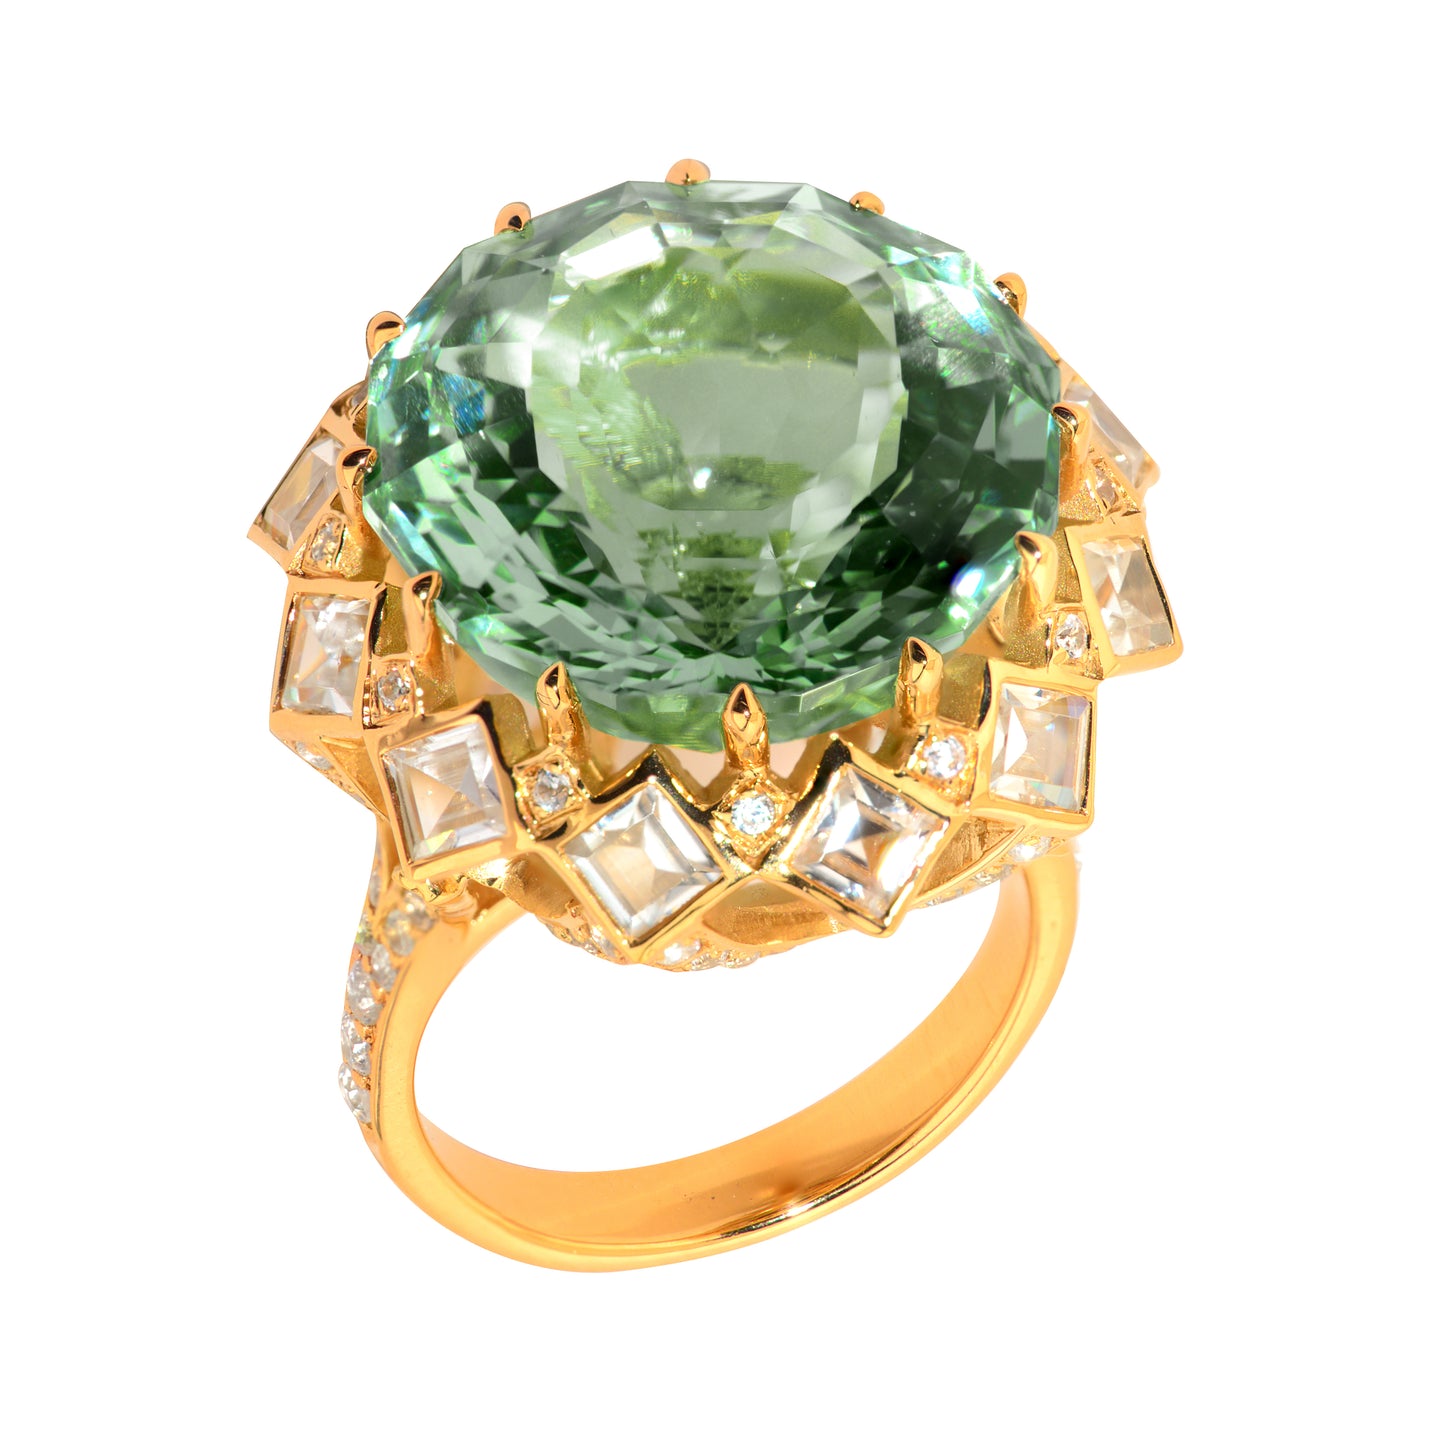 Stand out & Shine - Green Amethyst Crown Ring